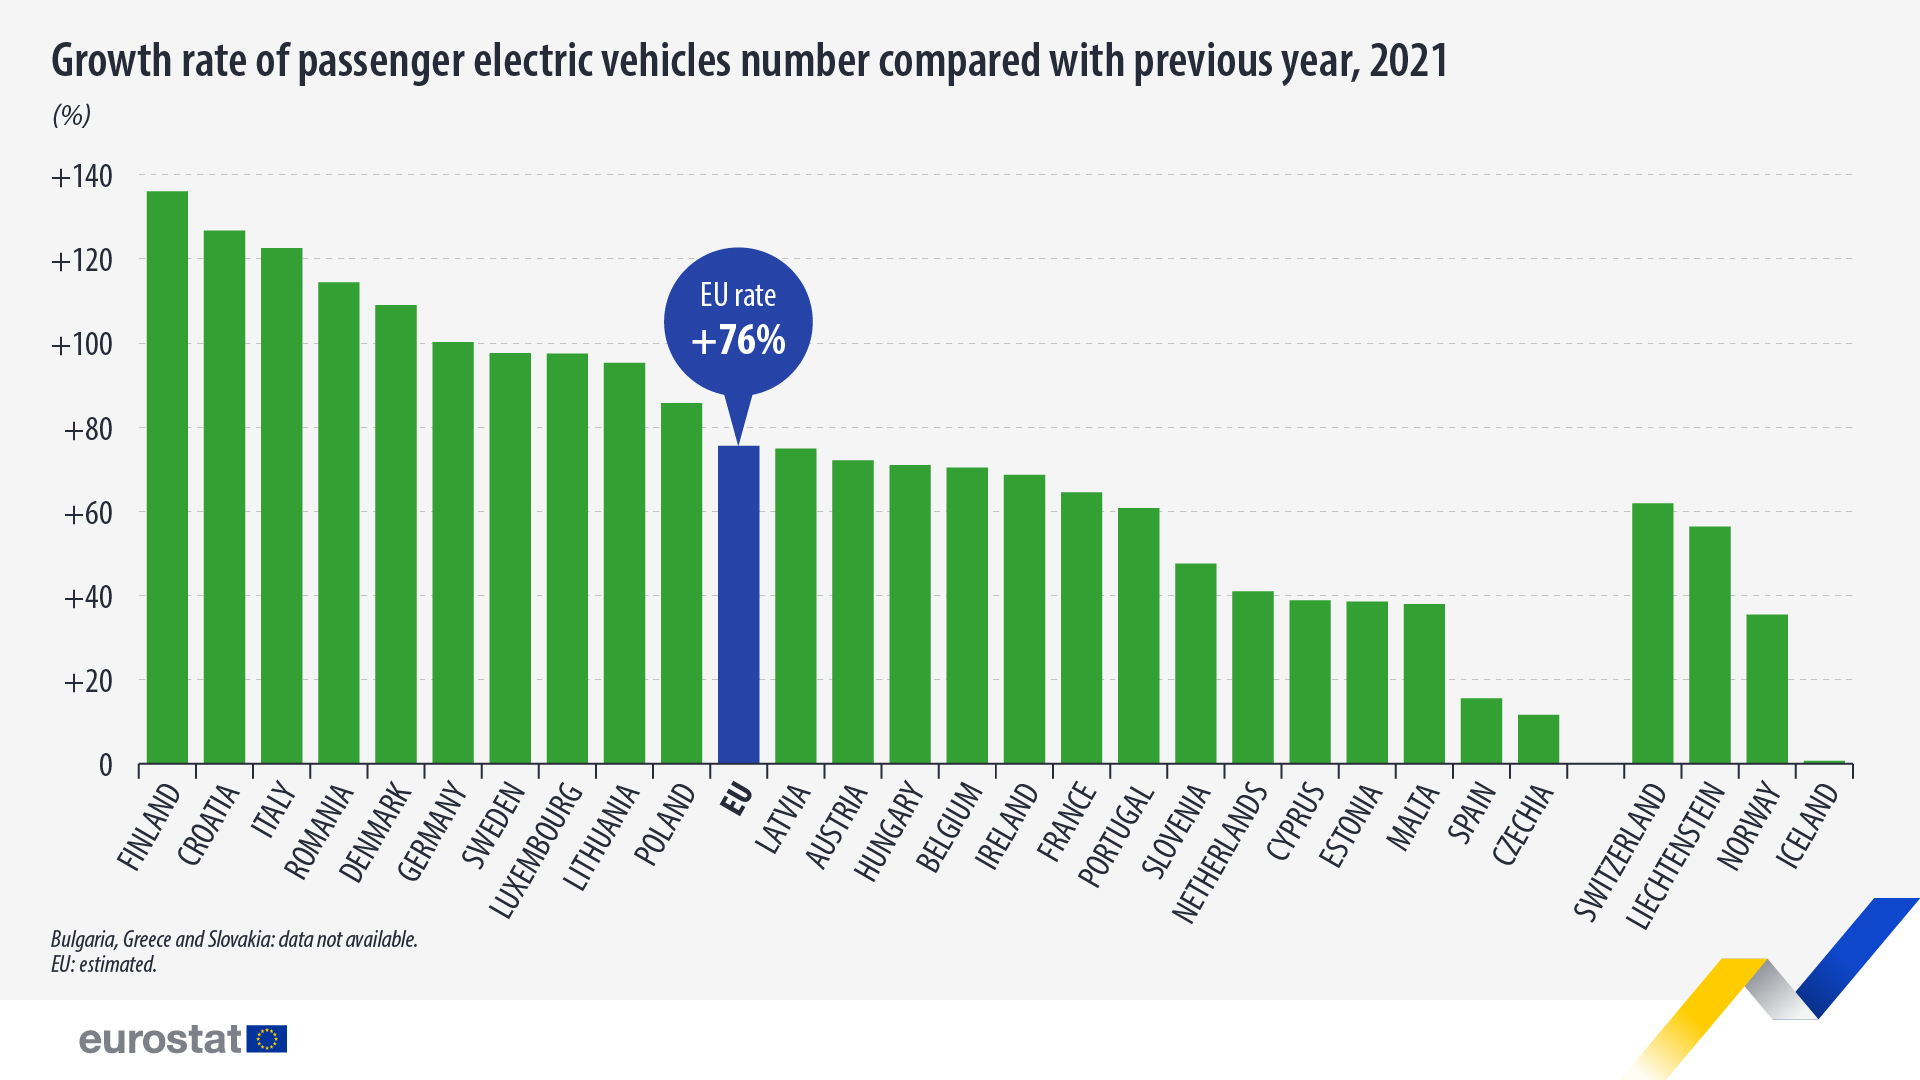 Bar graph: Growth rate of passenger electric vehicles number compared with previous year, 2021, in %